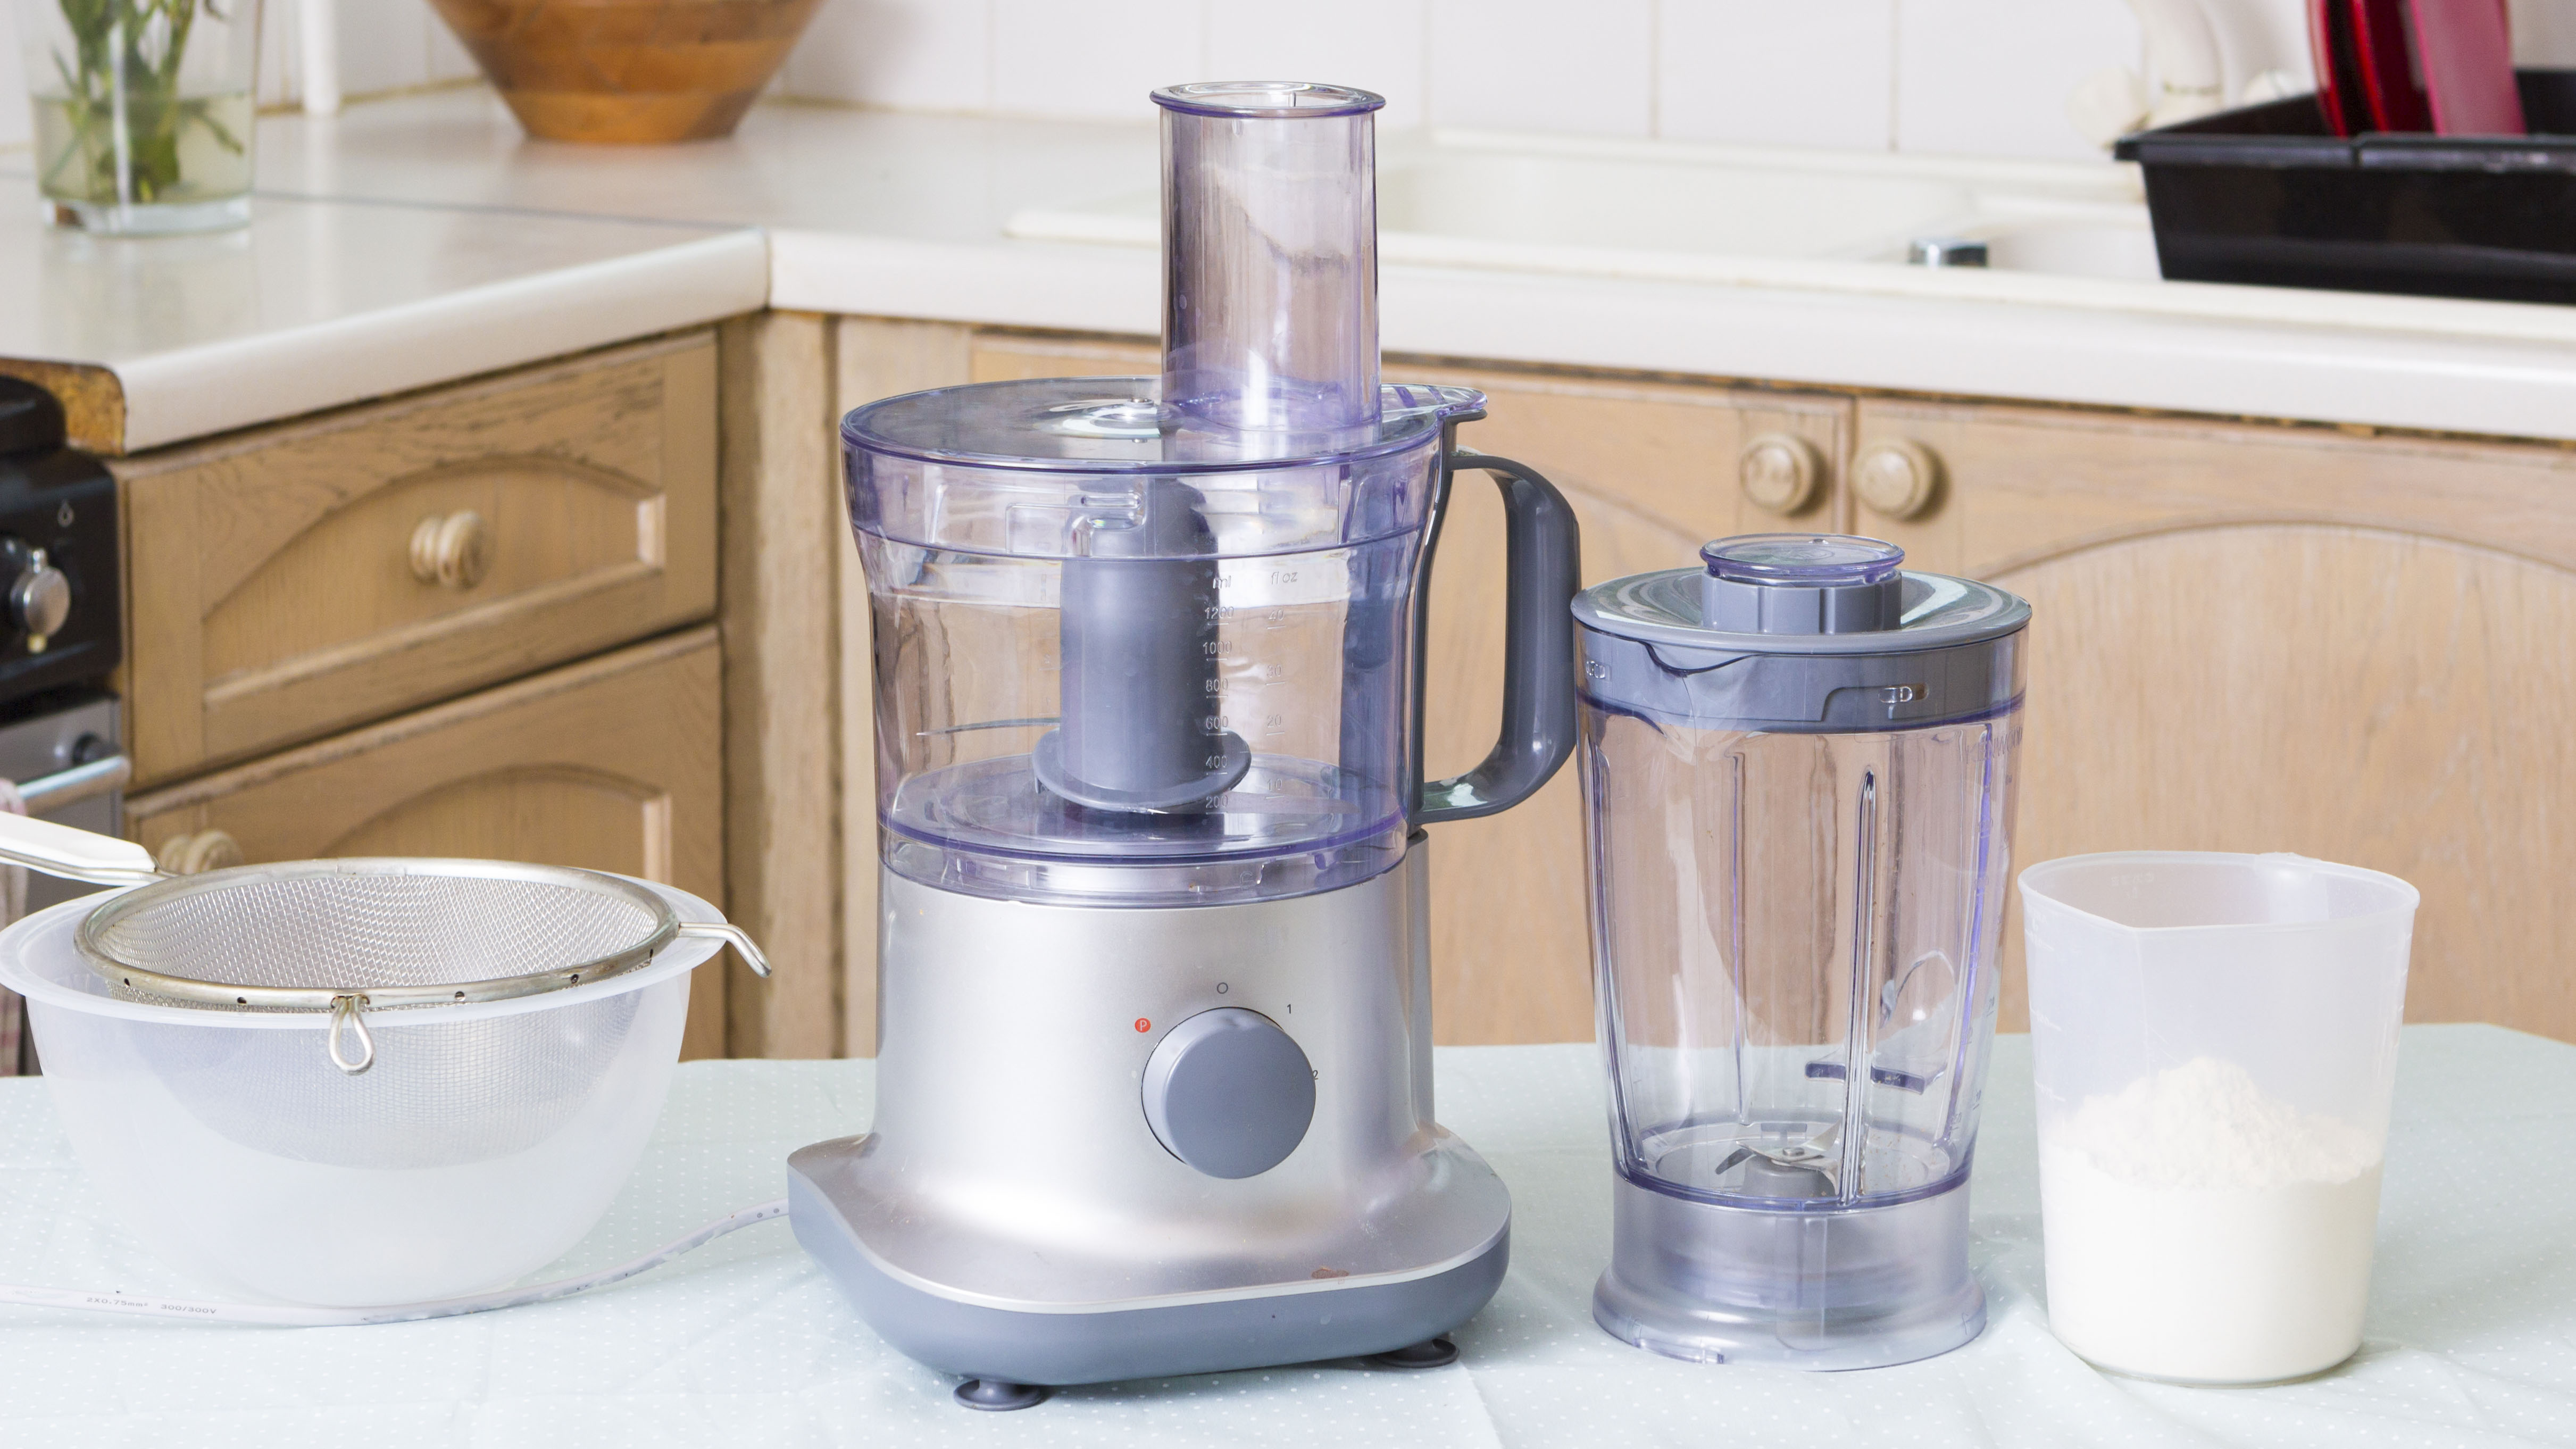 A food processor which also comes with a blending jug attachment